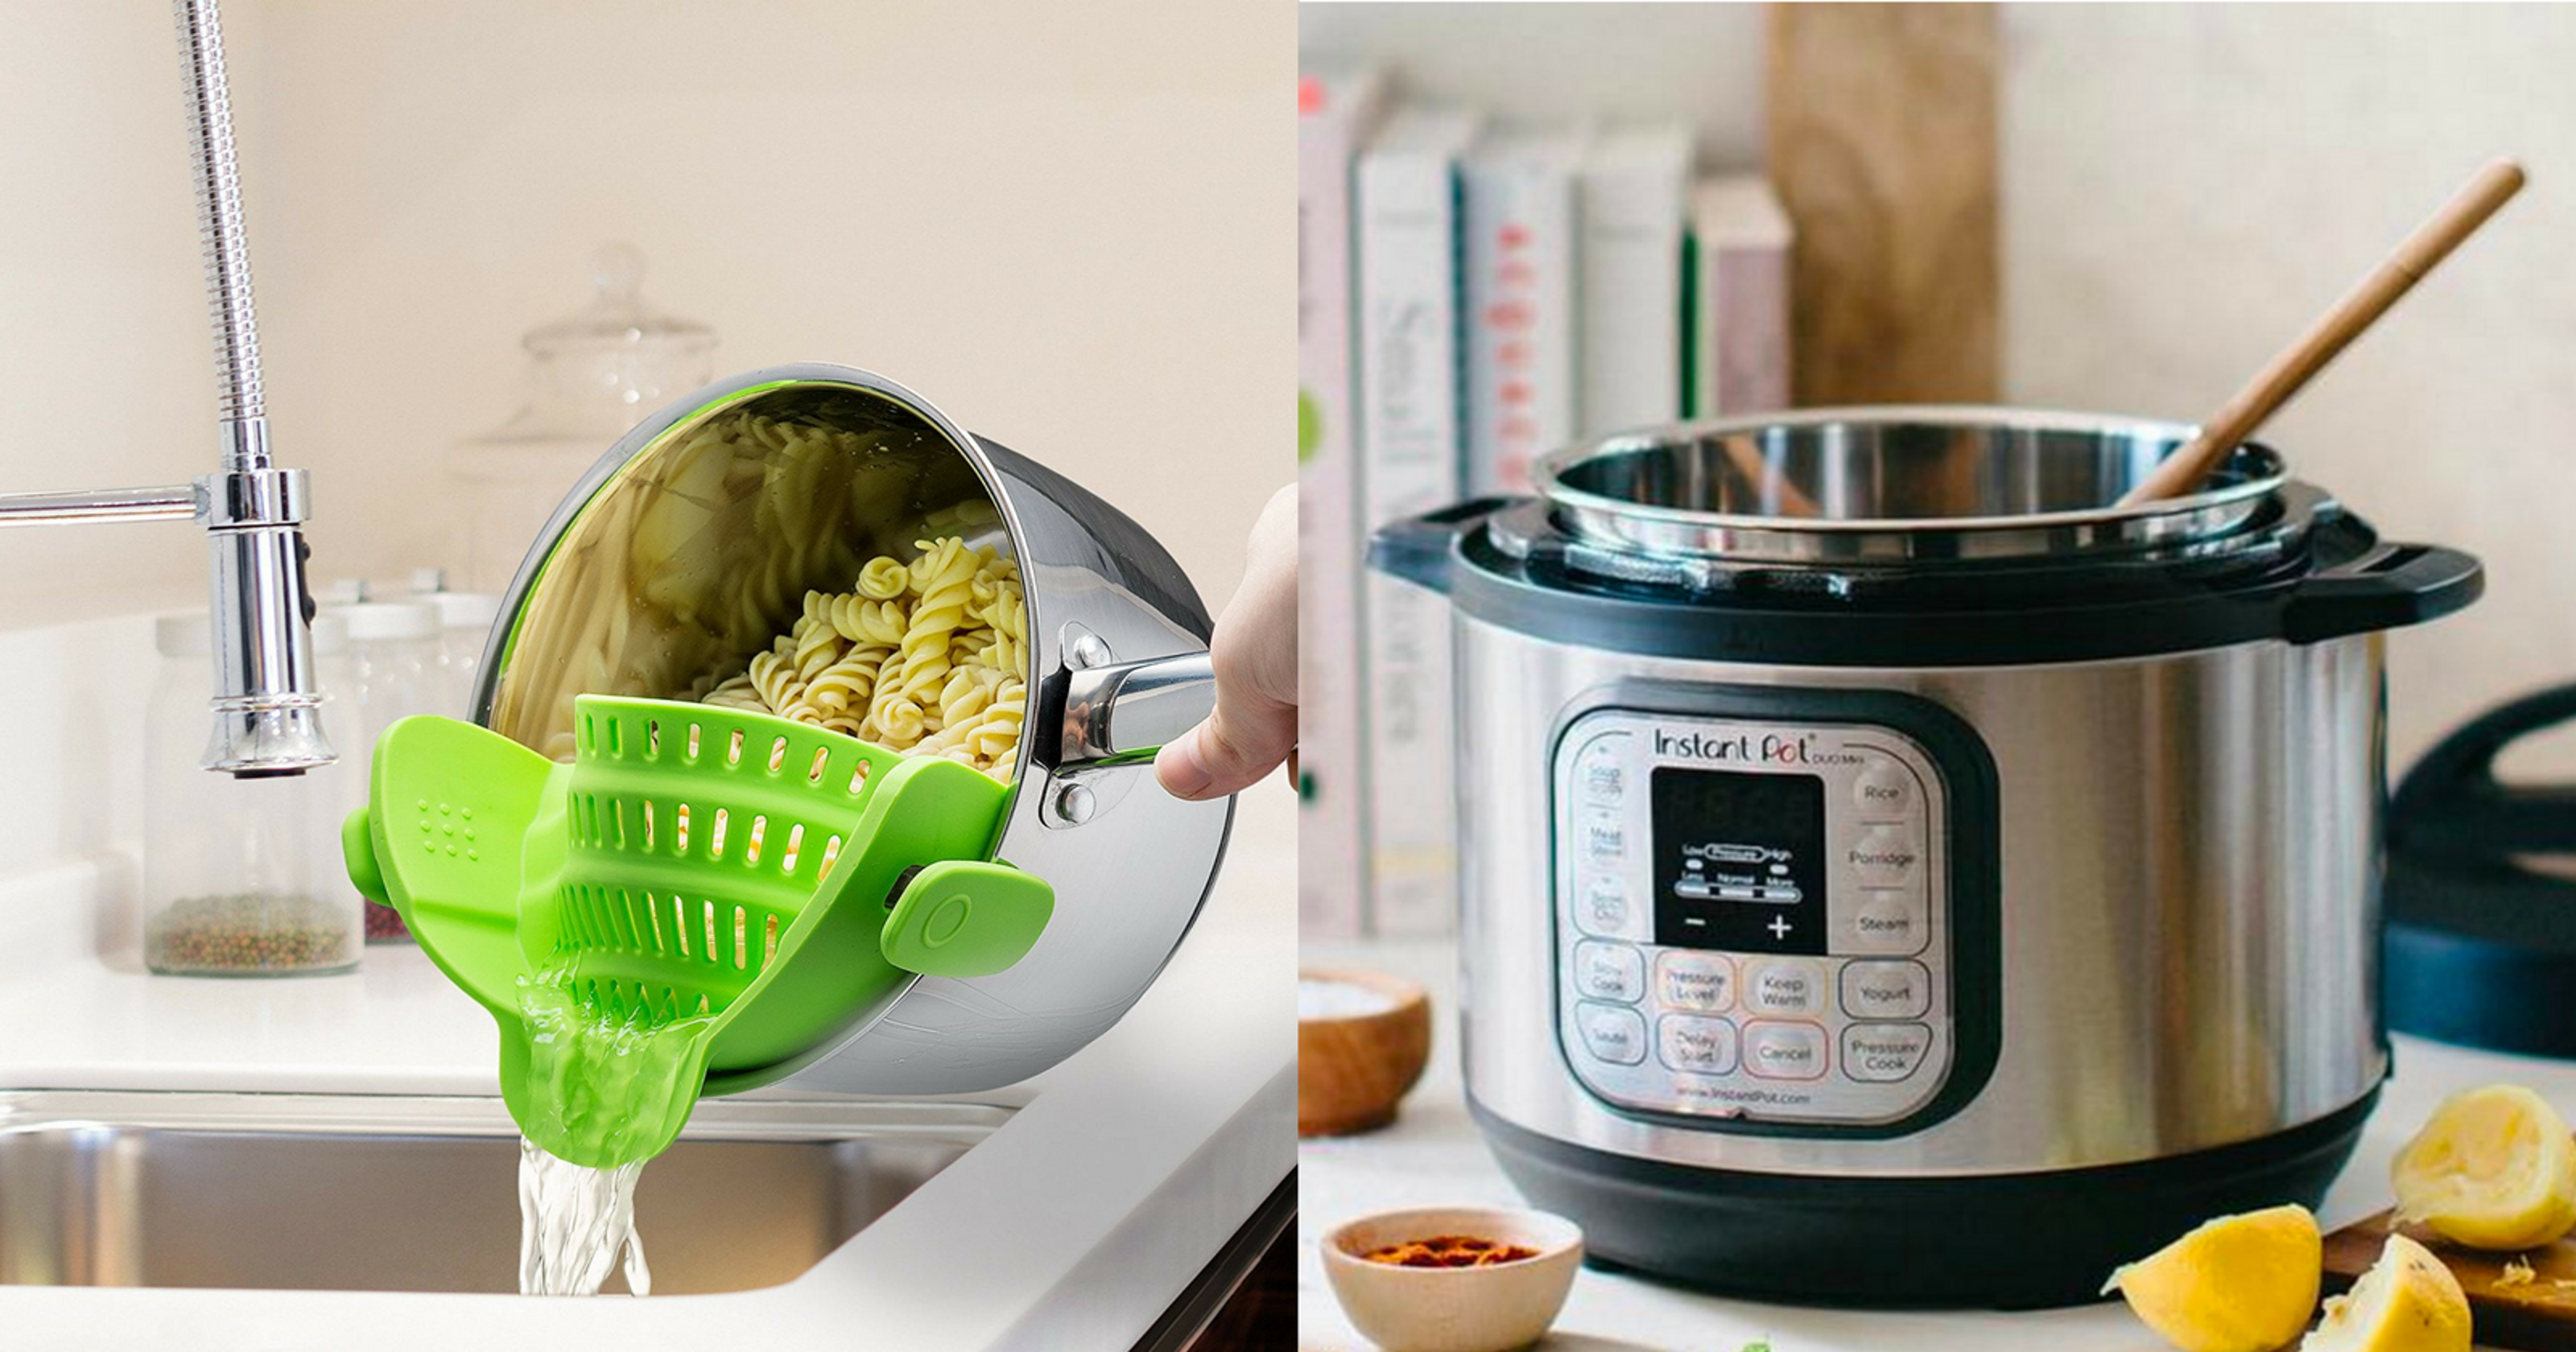 18 kitchen gadgets with more than 1,000 reviews on Amazon